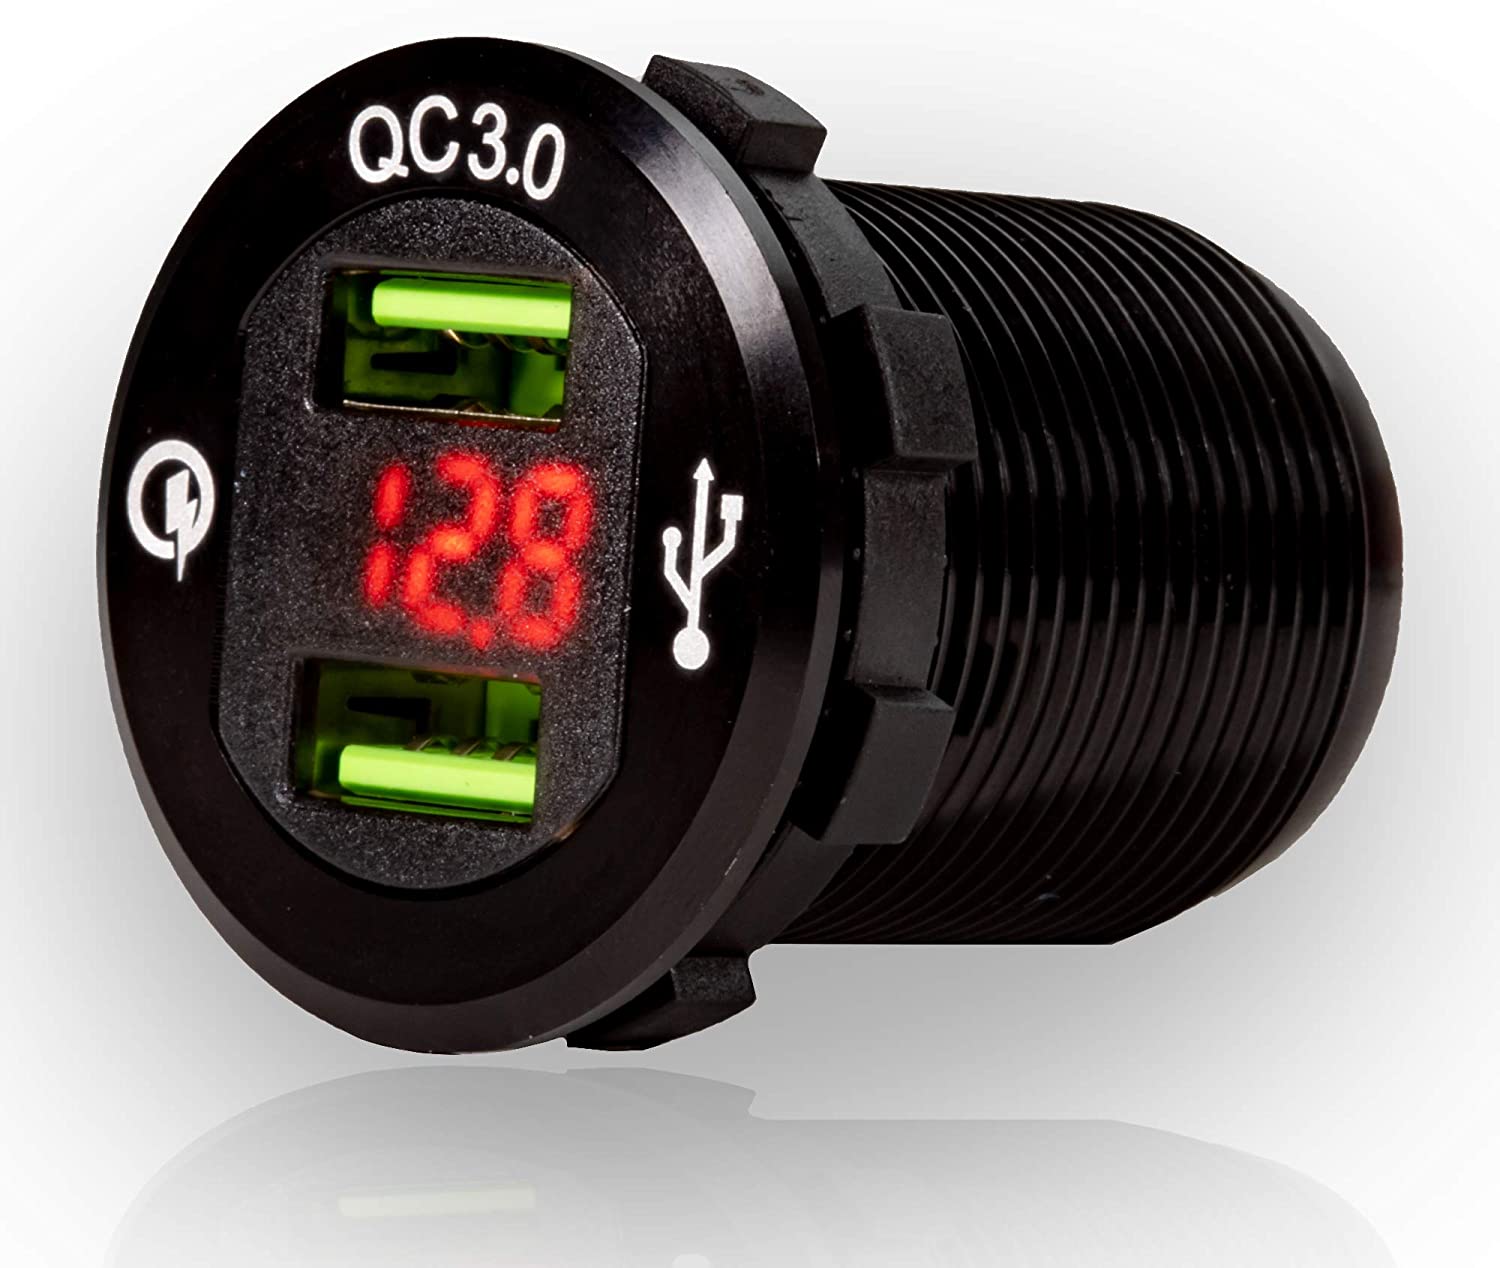 Black Quick Fast Charge USB 3.0 Car Charger, 12V/24V 36W Aluminum Waterproof Dual QC3.0 USB Fast Charger Socket Power Outlet with LED Digital Voltmeter for Marine, Boat, Motorcycle, Truck and More